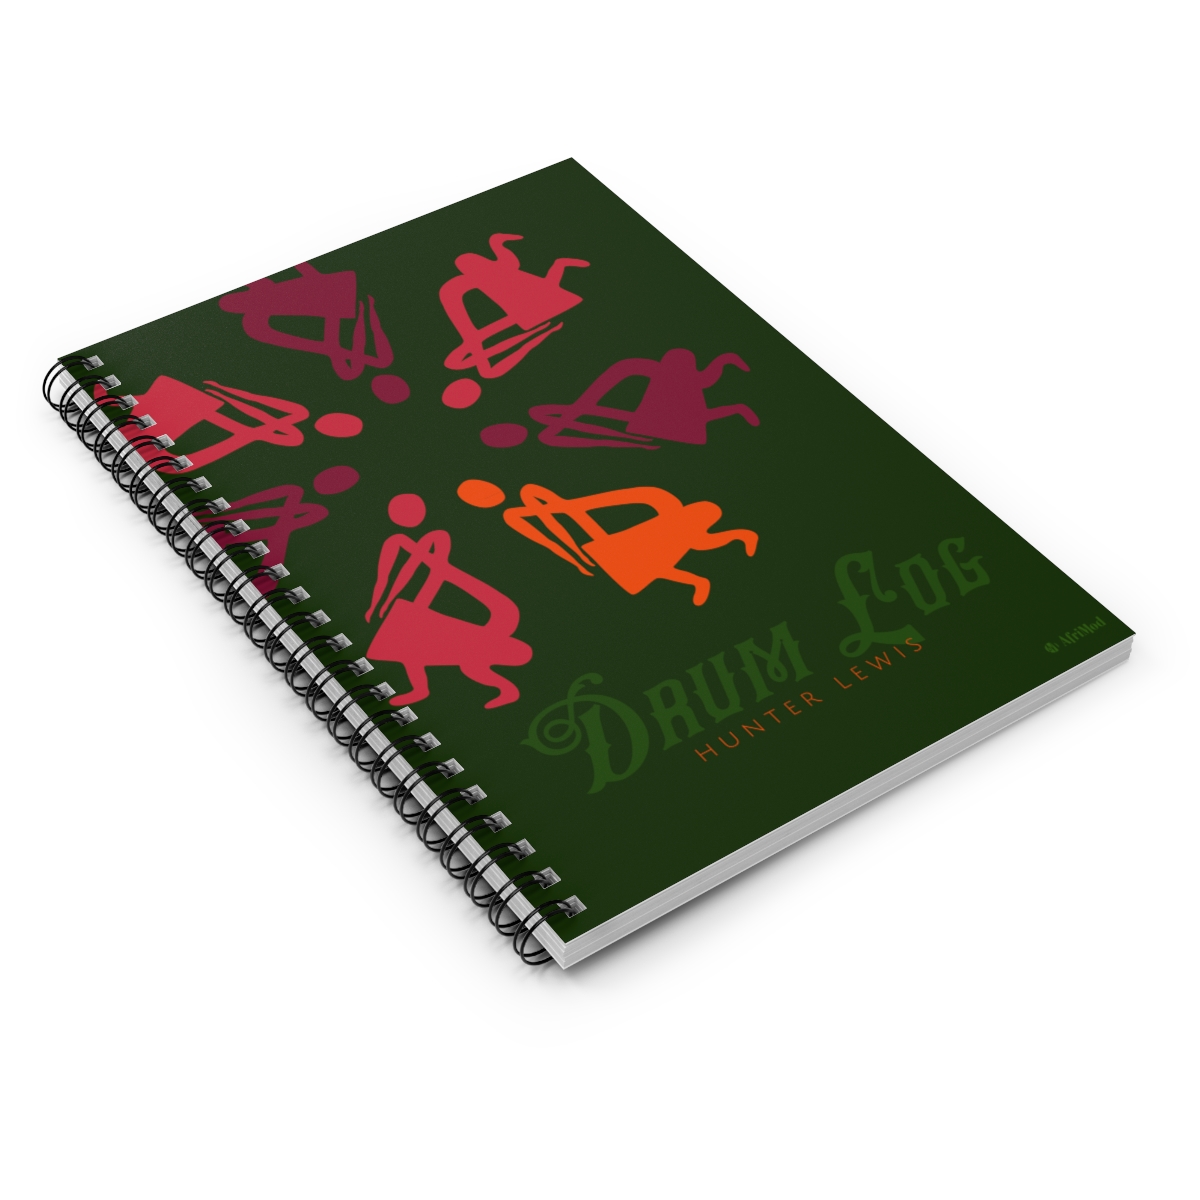 Customizable Drum Journal / notebook for drummers